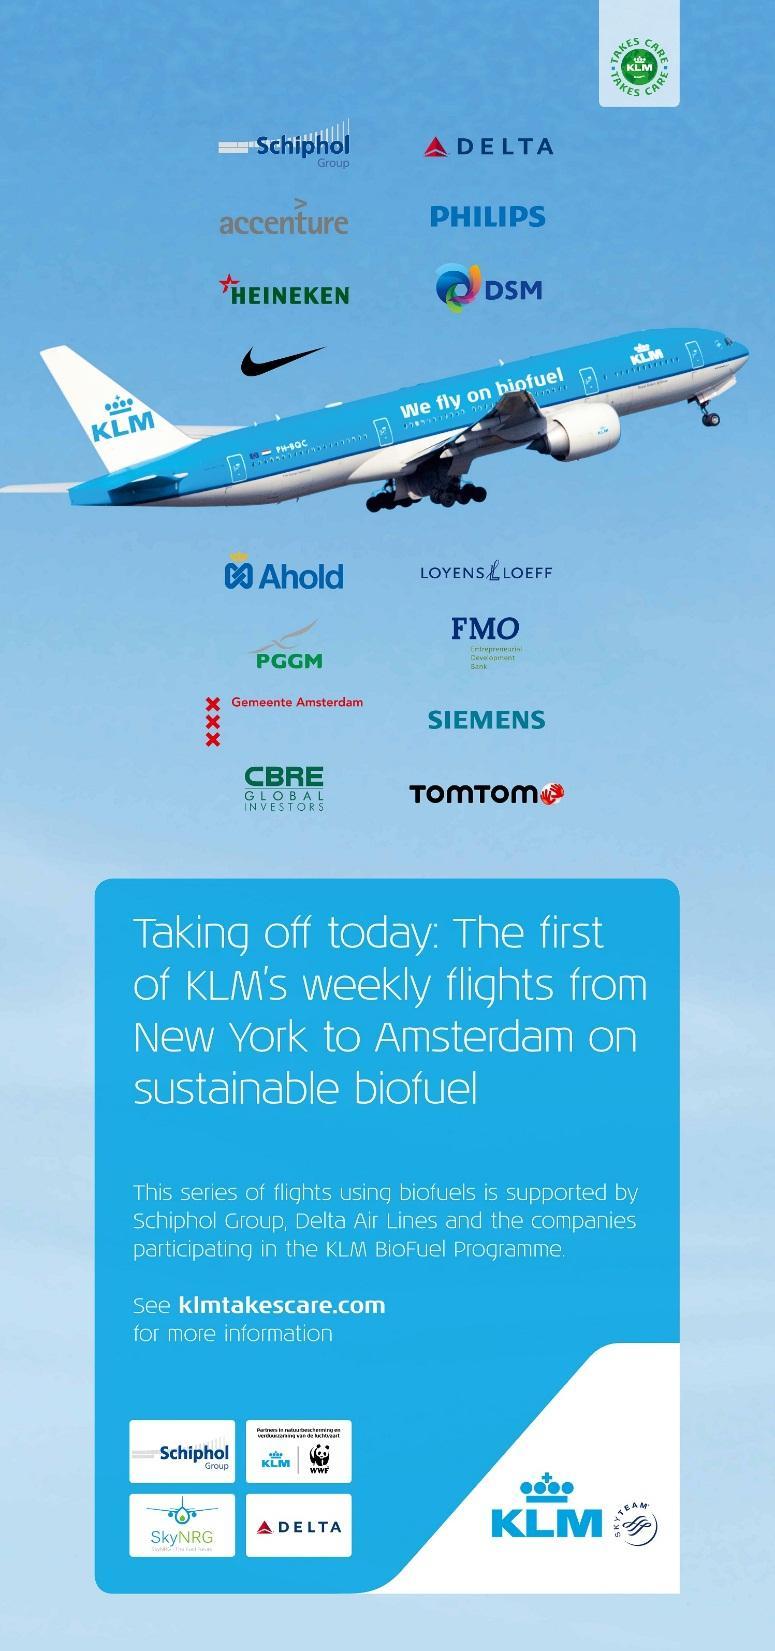 The first corporate program offering is now in place in Amsterdam with KLM and Schiphol Airport as partners Global roll out now in progress (North